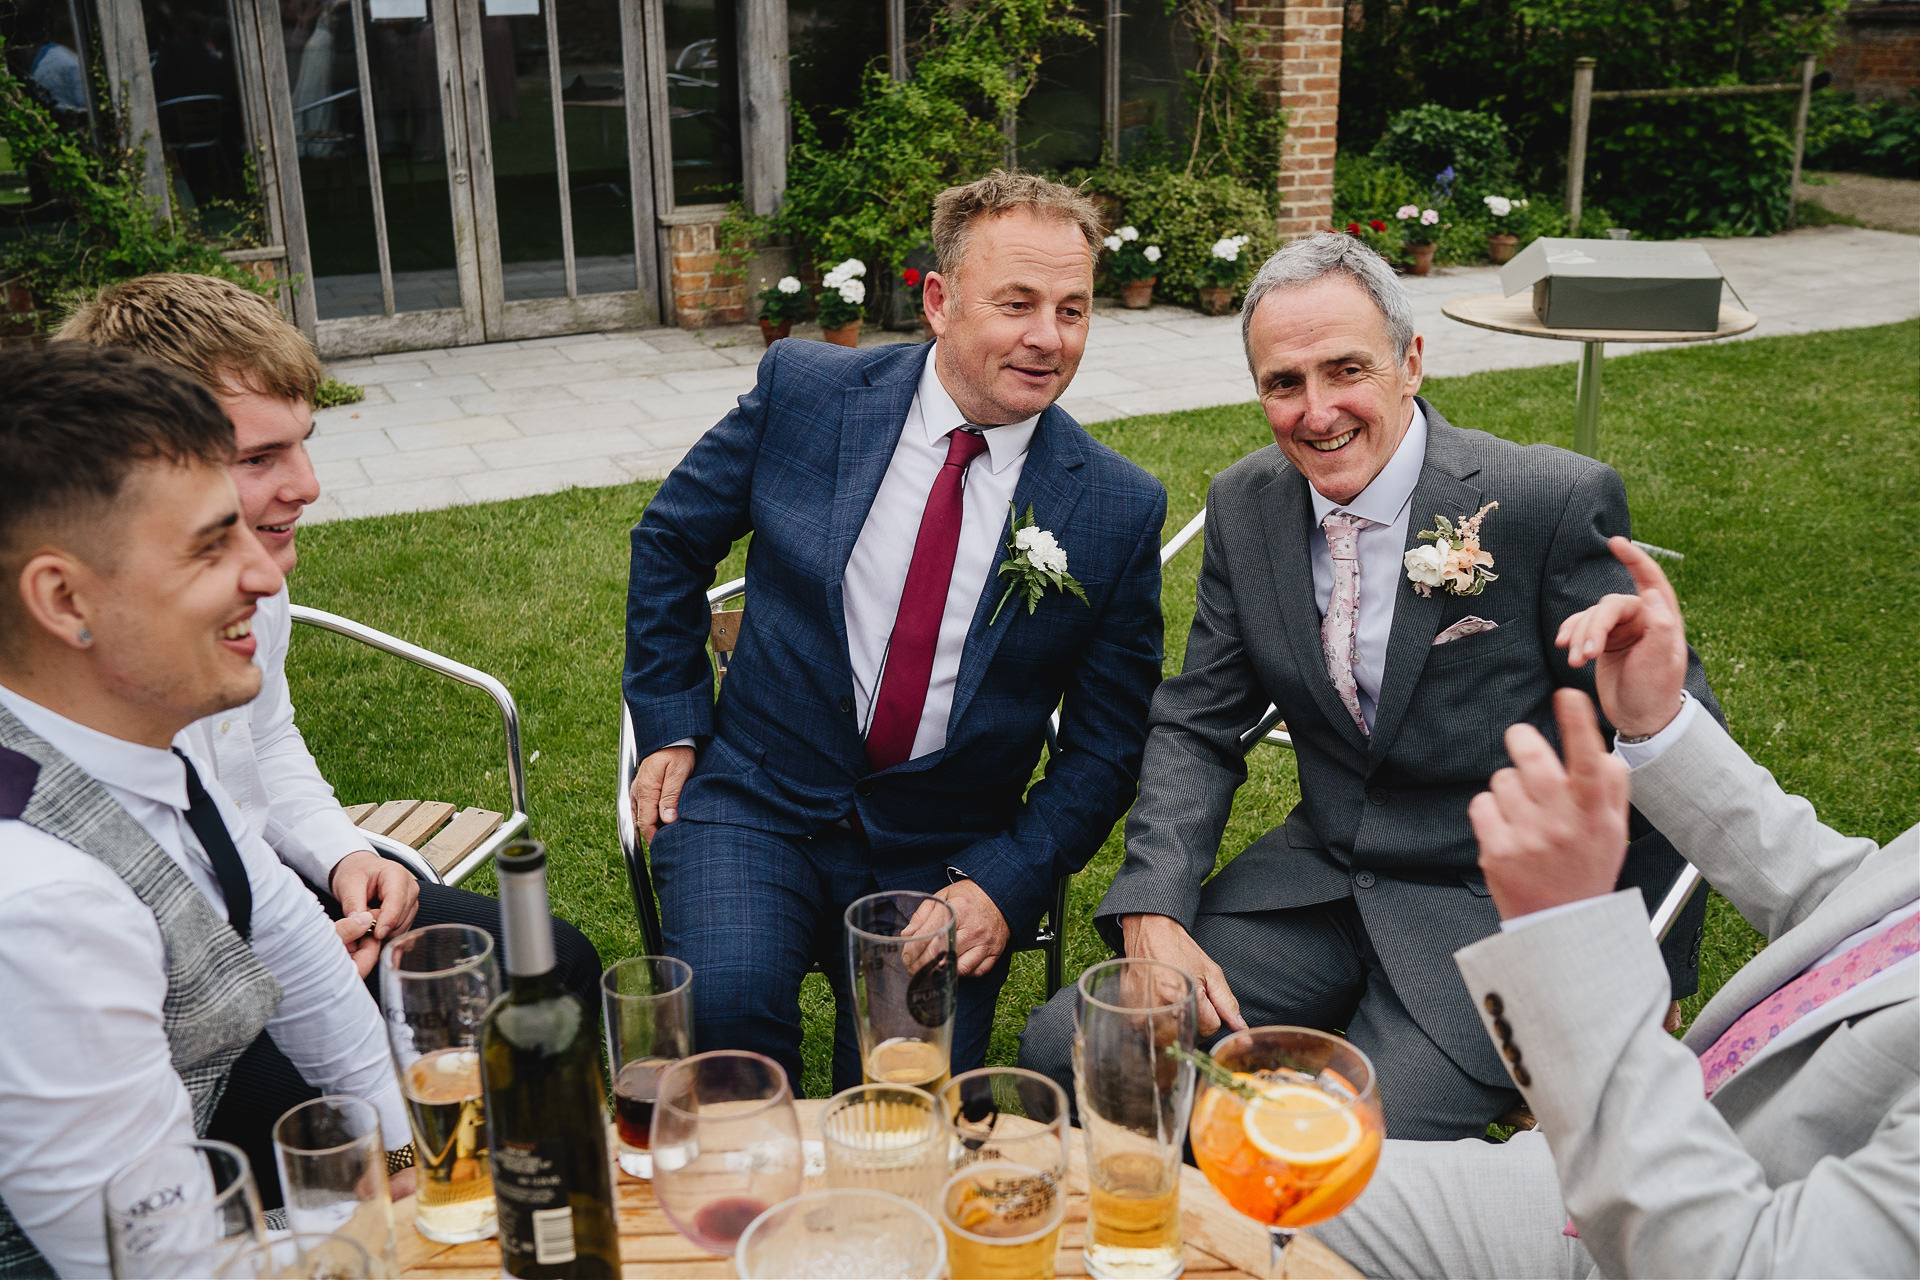 Wedding guests laughing around a table with drinks